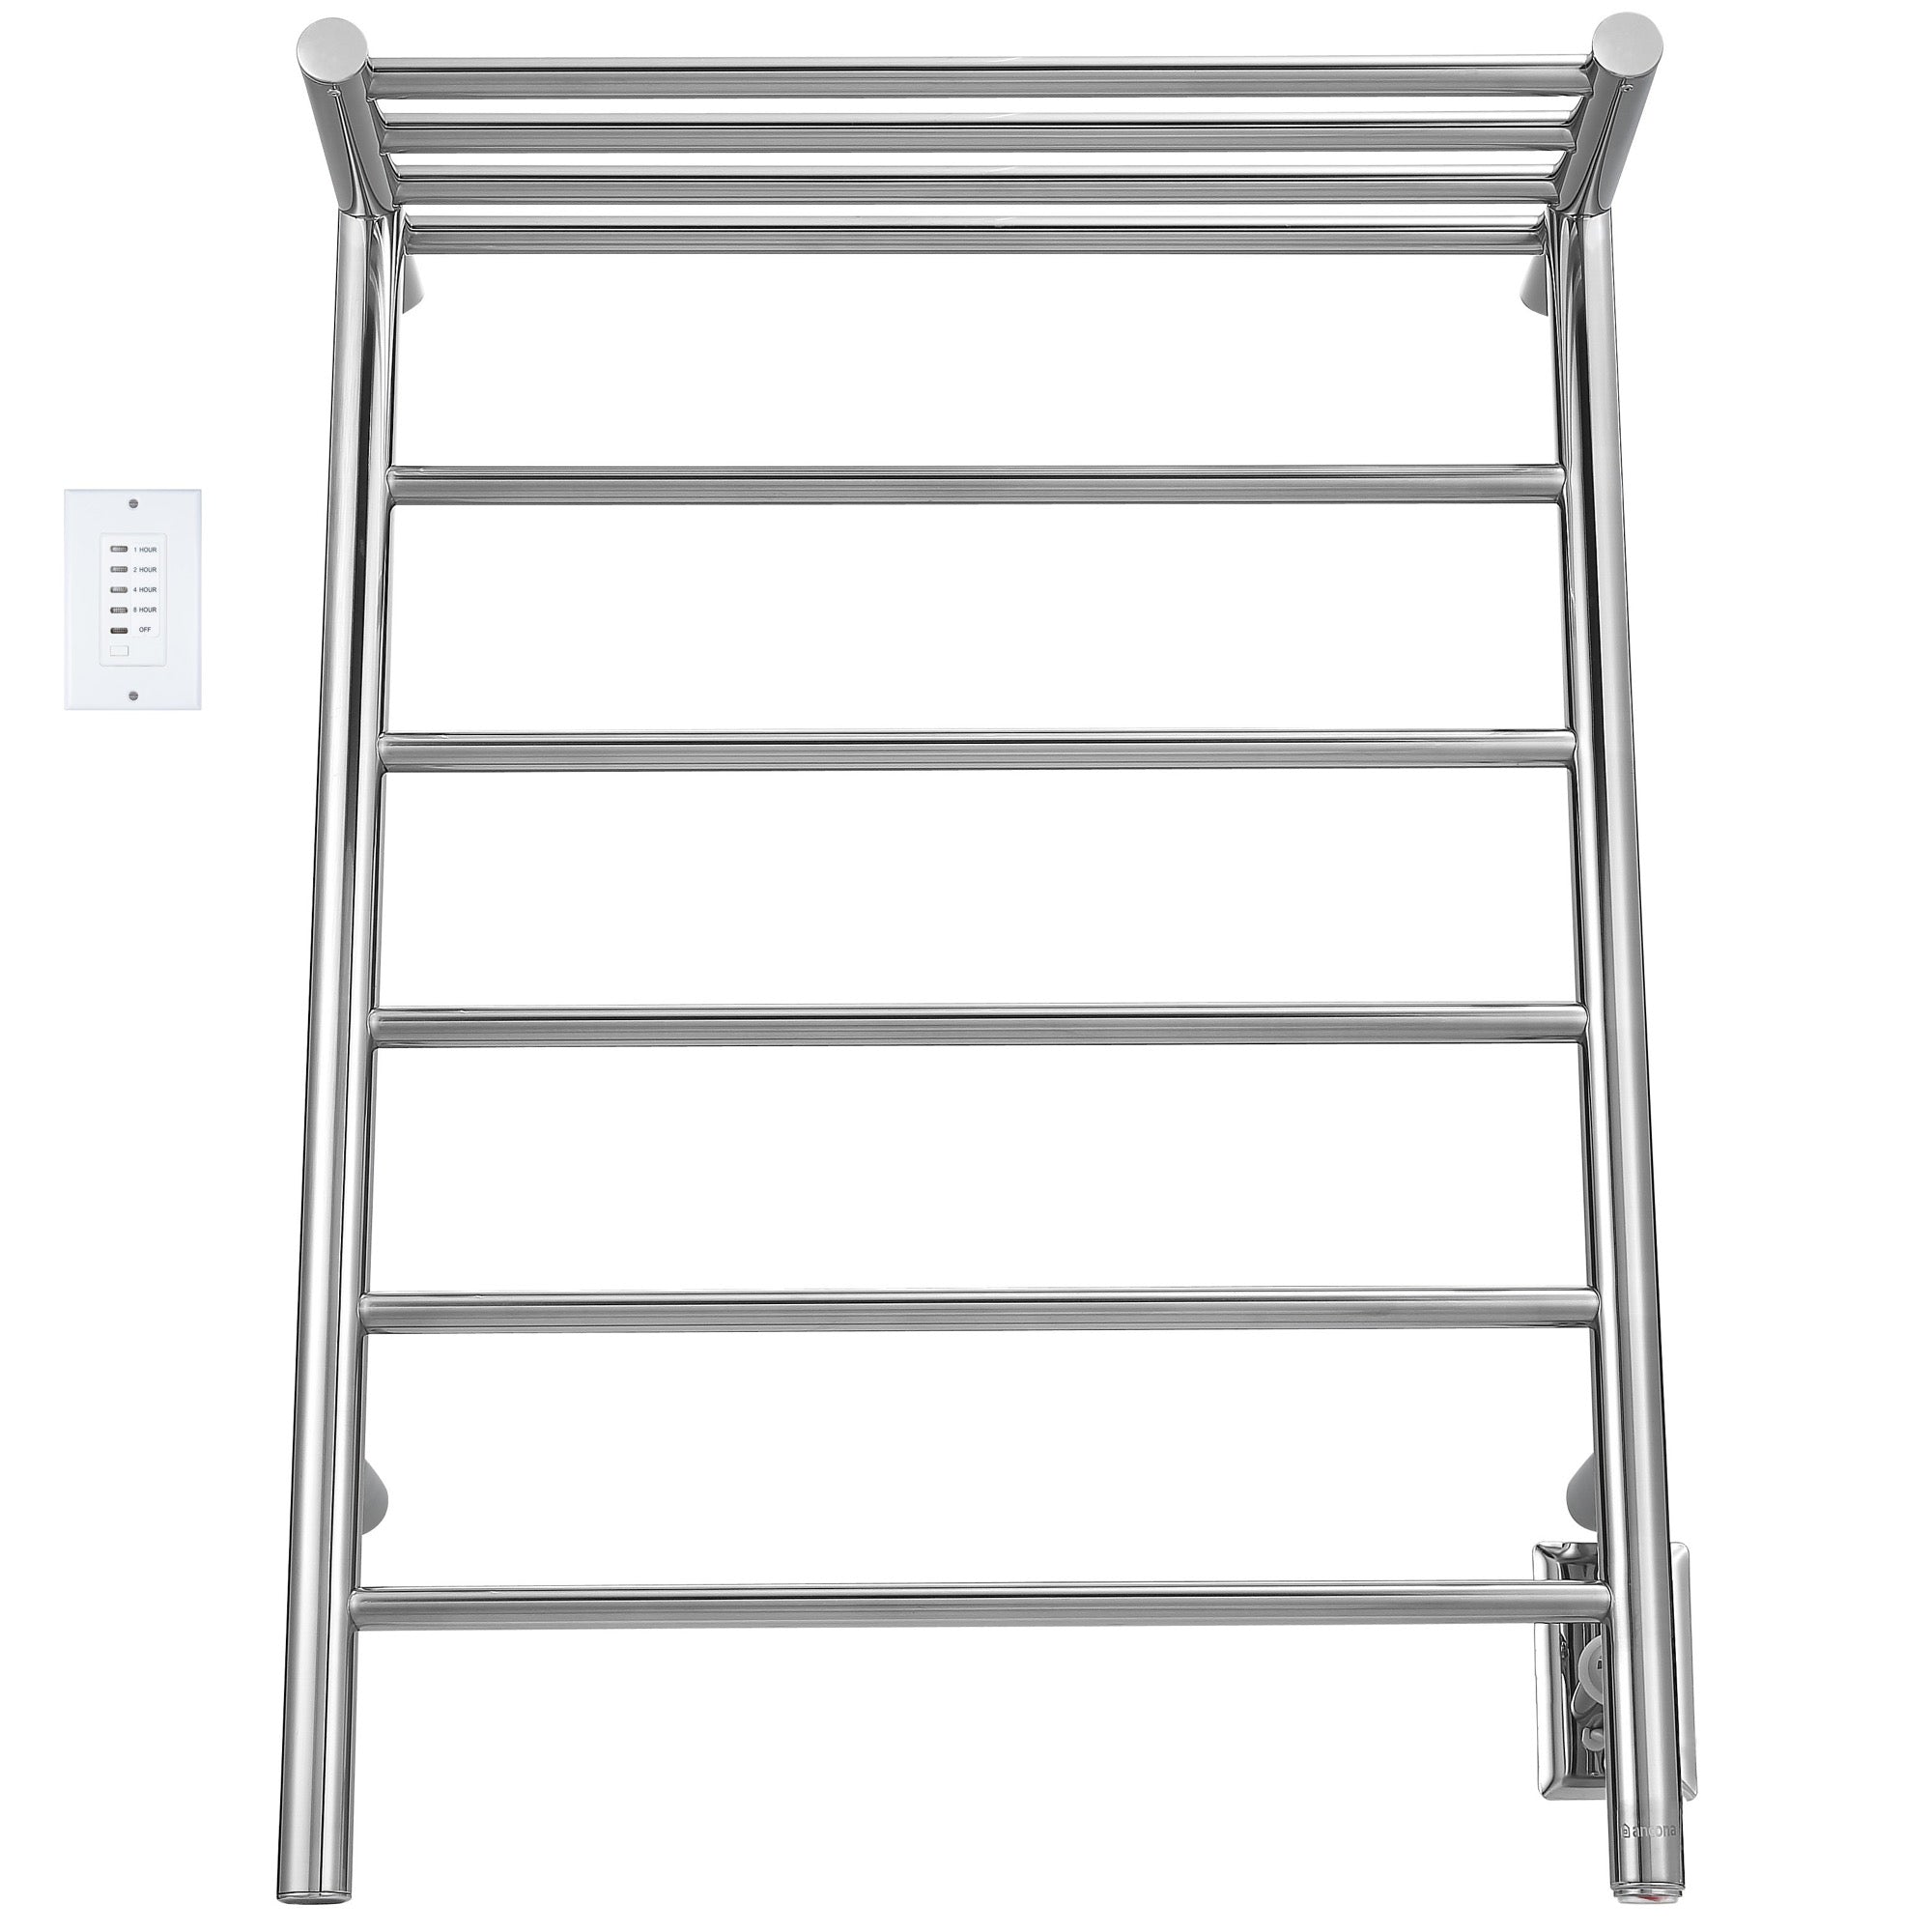 Ancona Miazzo 5-Bar Plug-In and Hardwire Towel Warmer with Shelf and Wall Countdown Timer in Polished Stainless Steel